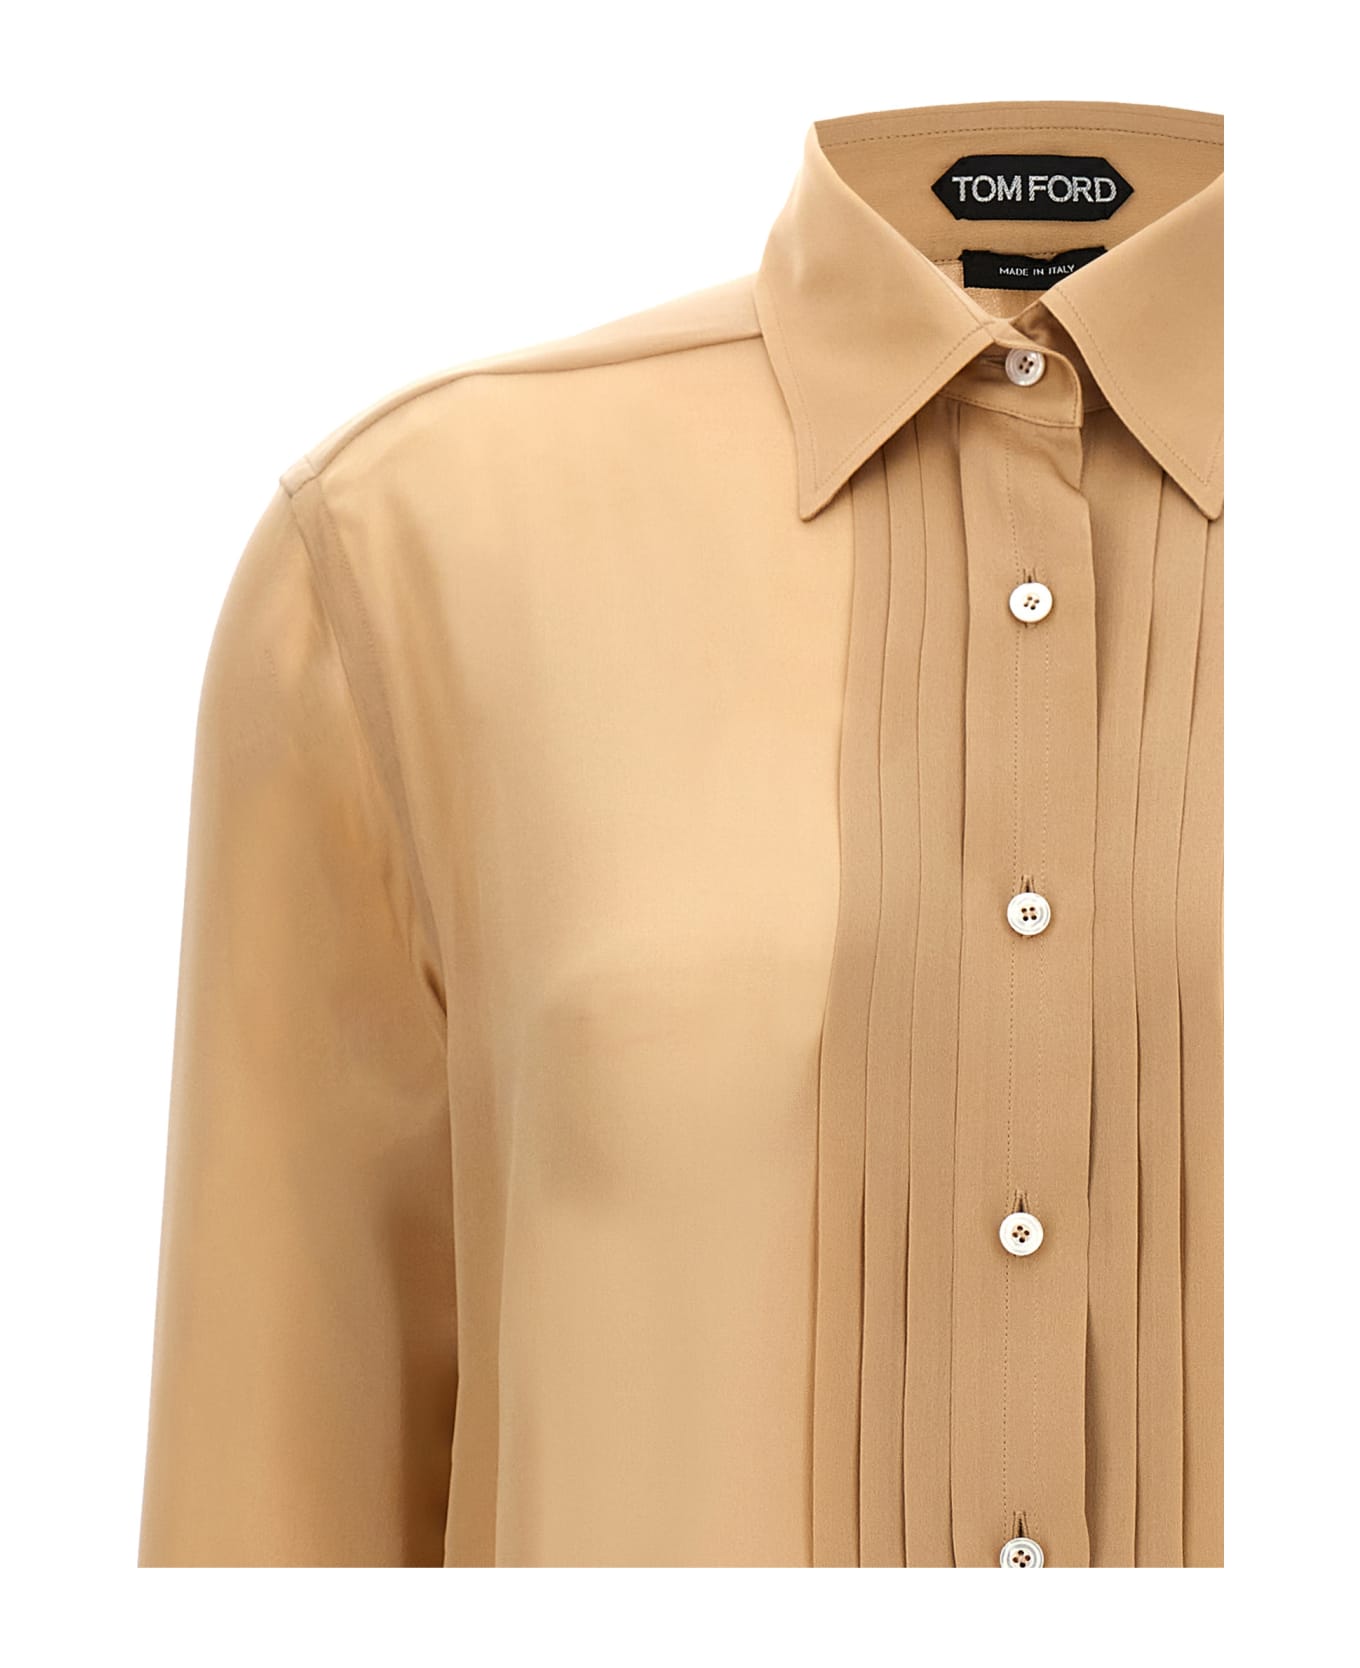 Tom Ford Pleated Plastron Shirt - Beige